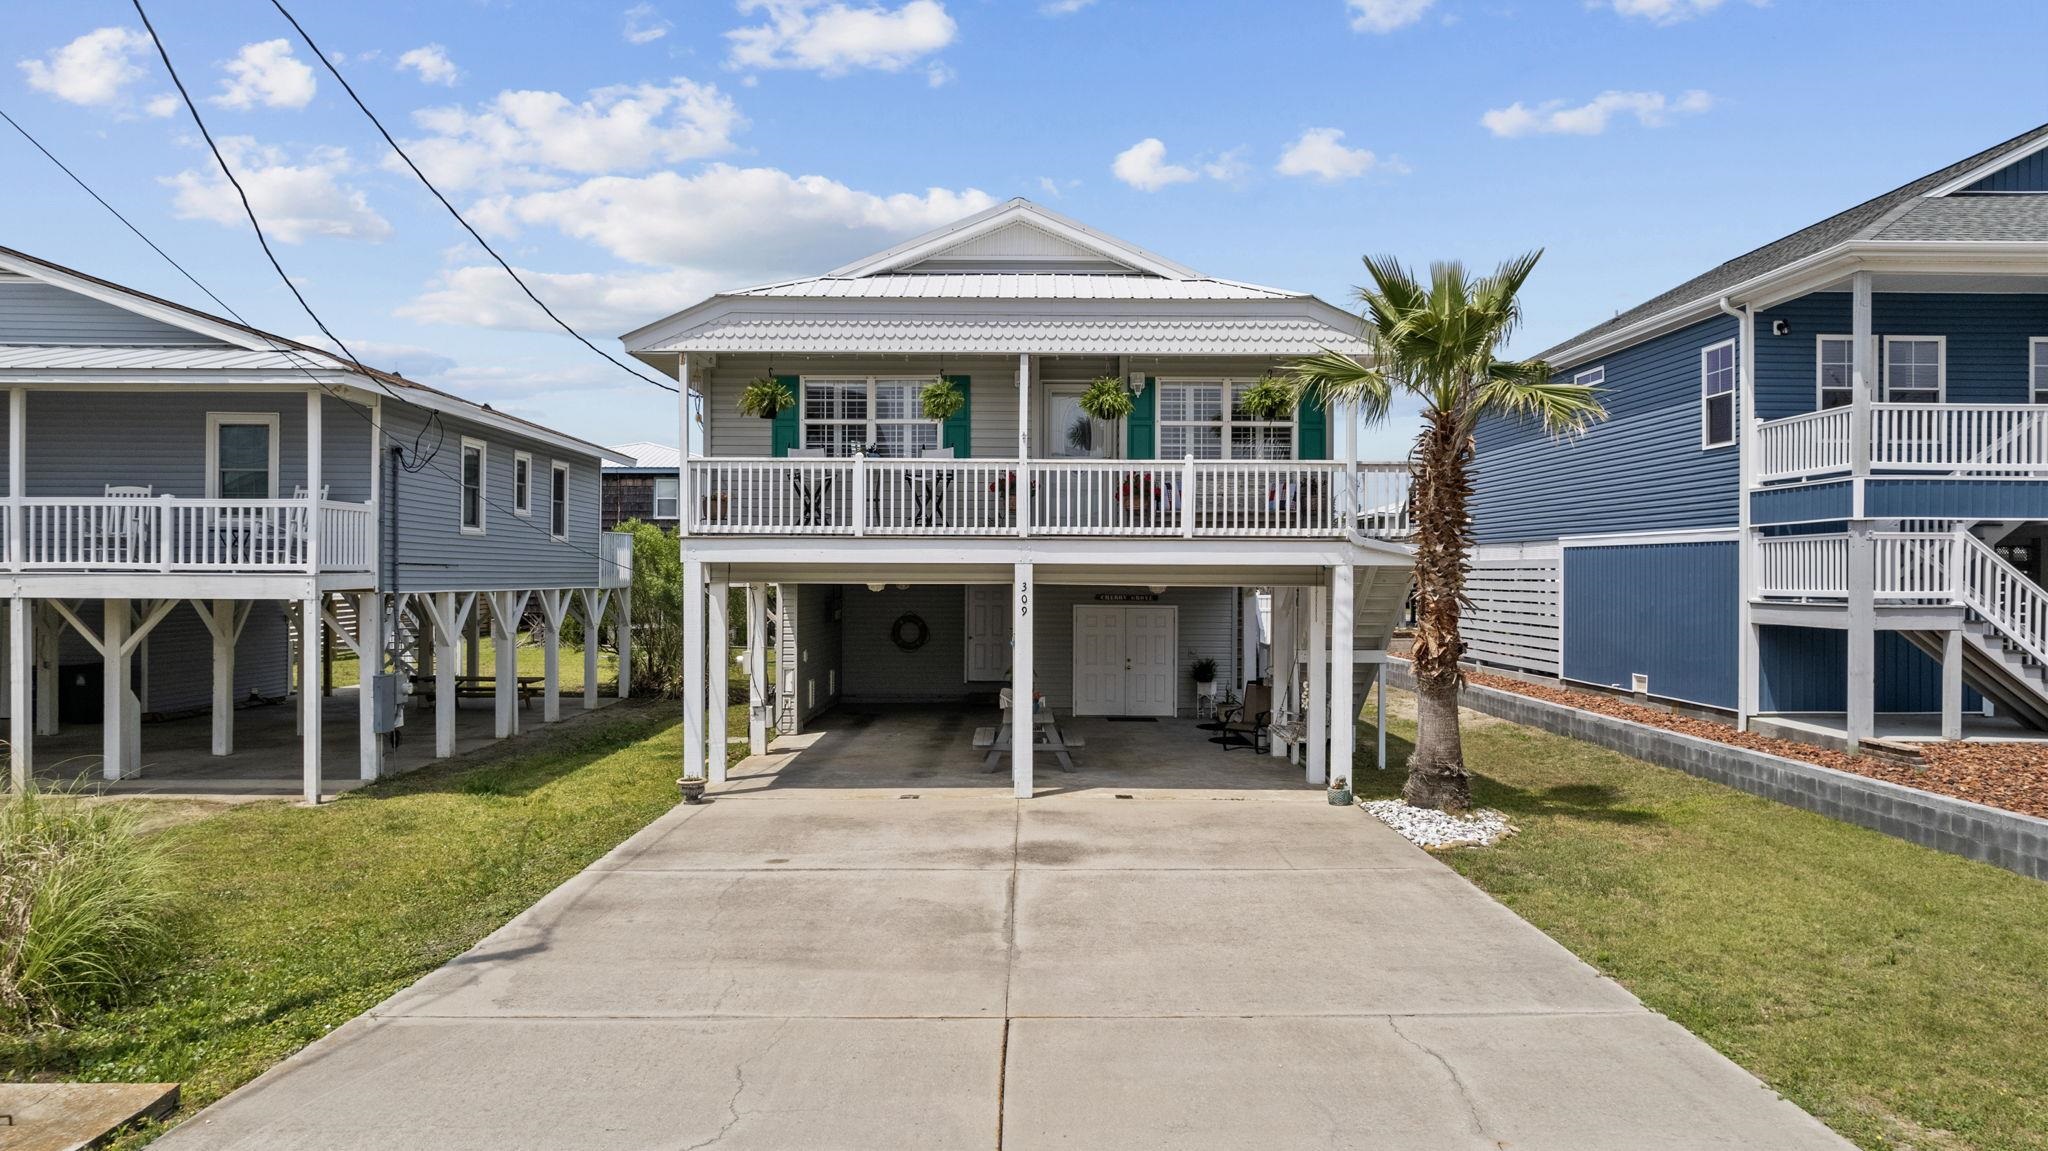 ***open house sat april 27th 1-3 pm*** this is it! it's the opportunity you've been waiting for - to own your slice of paradise in the coveted cherry grove area of north myrtle beach, without the constraints of an hoa. this charming four-bedroom (one is non-conforming) two-bathroom home exudes character and warmth, with its unique charm and custom upgrades. nestled just one and one-half blocks from the beach and conveniently situated across from a beach access, this home offers the quintessential beachside lifestyle. stroll to nearby shops, restaurants, and the iconic cherry grove fishing pier, immersing yourself in the vibrant coastal atmosphere. step inside to discover a well-maintained interior boasting custom touches throughout. from the beautifully tiled primary bathroom to the elegant tongue and groove ceiling, every detail has been thoughtfully crafted. the kitchen, a focal point of the home, features granite countertops, stainless steel appliances, and a custom peninsula with additional cabinets - perfect for all types of gatherings. relaxation awaits on the front or back deck, where you can savor your morning coffee or unwind with your favorite afternoon beverage. plantation shutters adorn the windows, adding a touch of elegance, while a versatile flex space provides endless possibilities - whether as an office, fourth bedroom, exercise space etc. embrace the outdoor lifestyle with easy access to heritage shores nature preserve for tranquil walks and the cherry grove boat ramp for aquatic adventures along the intracoastal waterway. golf enthusiasts will delight in the plethora of nearby golf courses, ensuring endless opportunities for recreation and leisure. whether you're drawn to shopping, dining, golfing, fishing, boating, or simply soaking up the sun, this home offers it all. don't miss your chance to experience coastal living at its finest - schedule a viewing today and prepare to fall in love. your beachside oasis awaits!